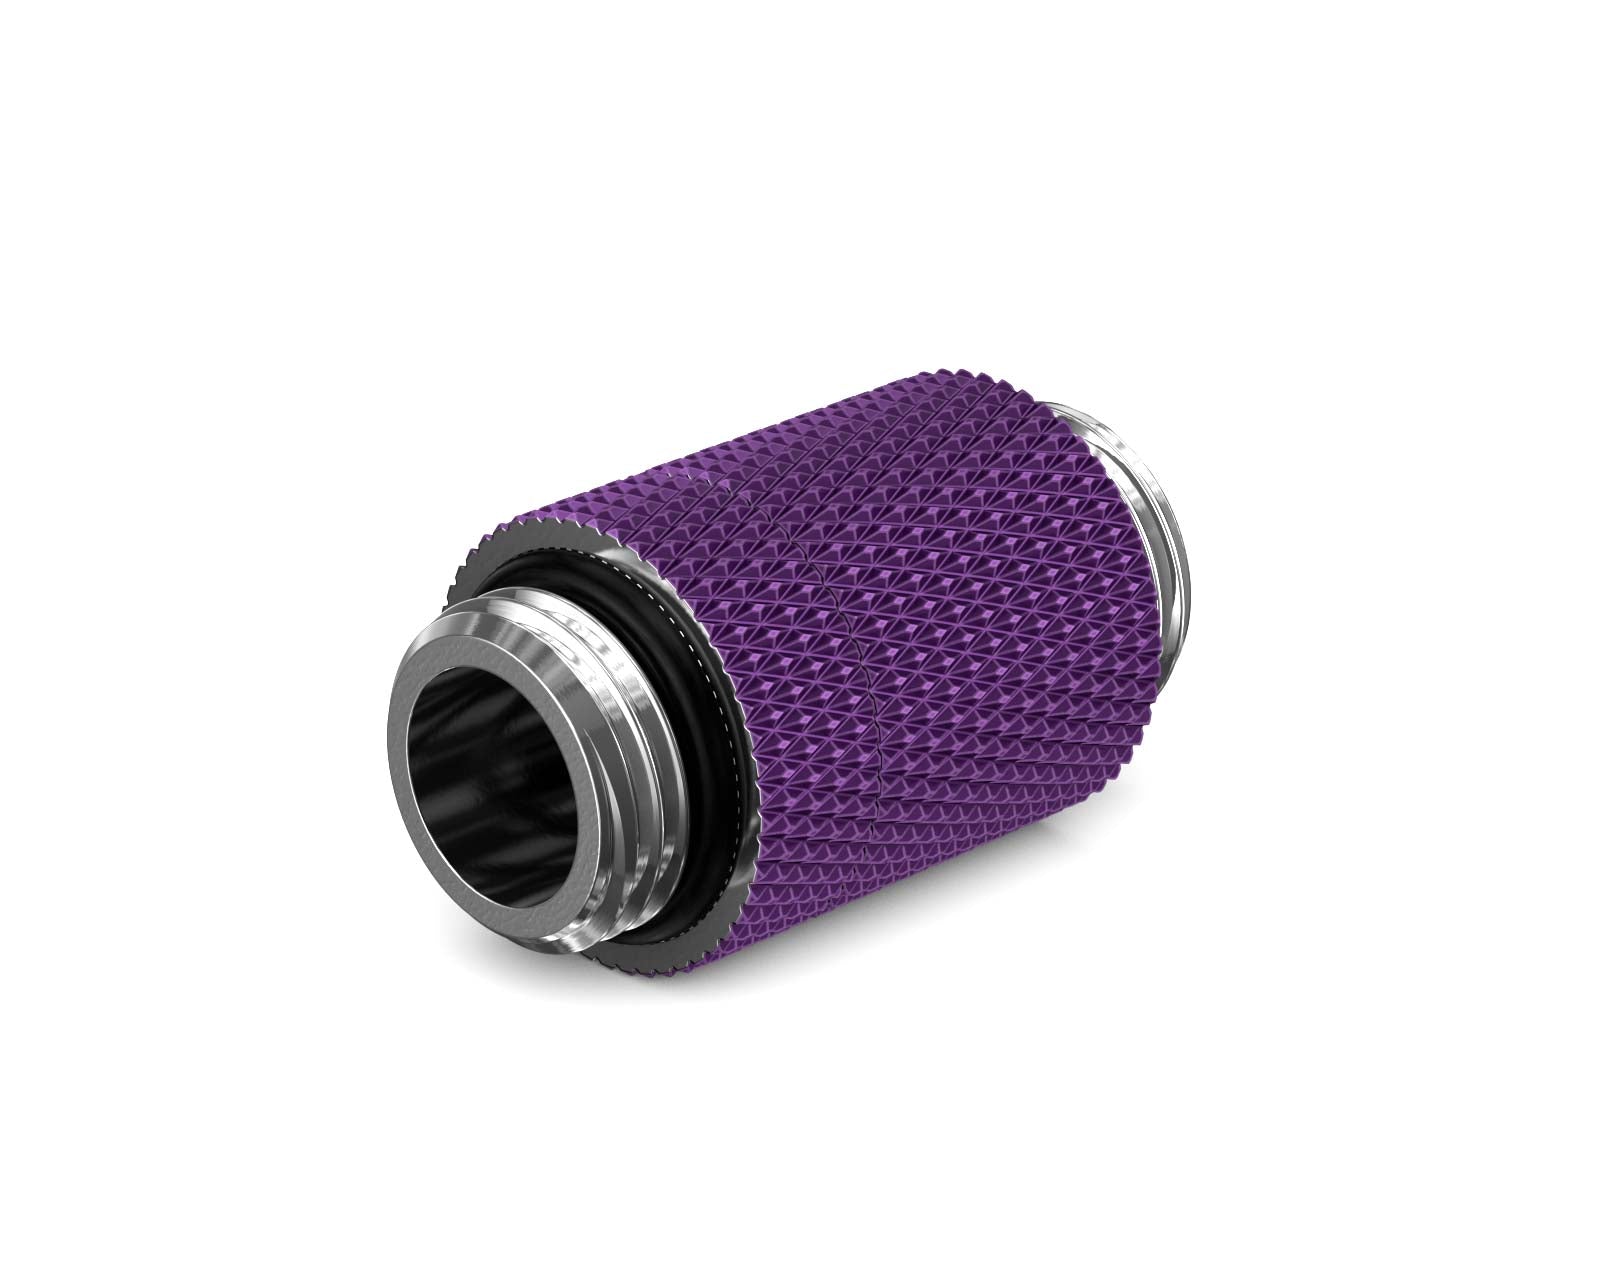 PrimoChill Dual Male G 1/4in. SX Rotary Extension Coupler - PrimoChill - KEEPING IT COOL Candy Purple